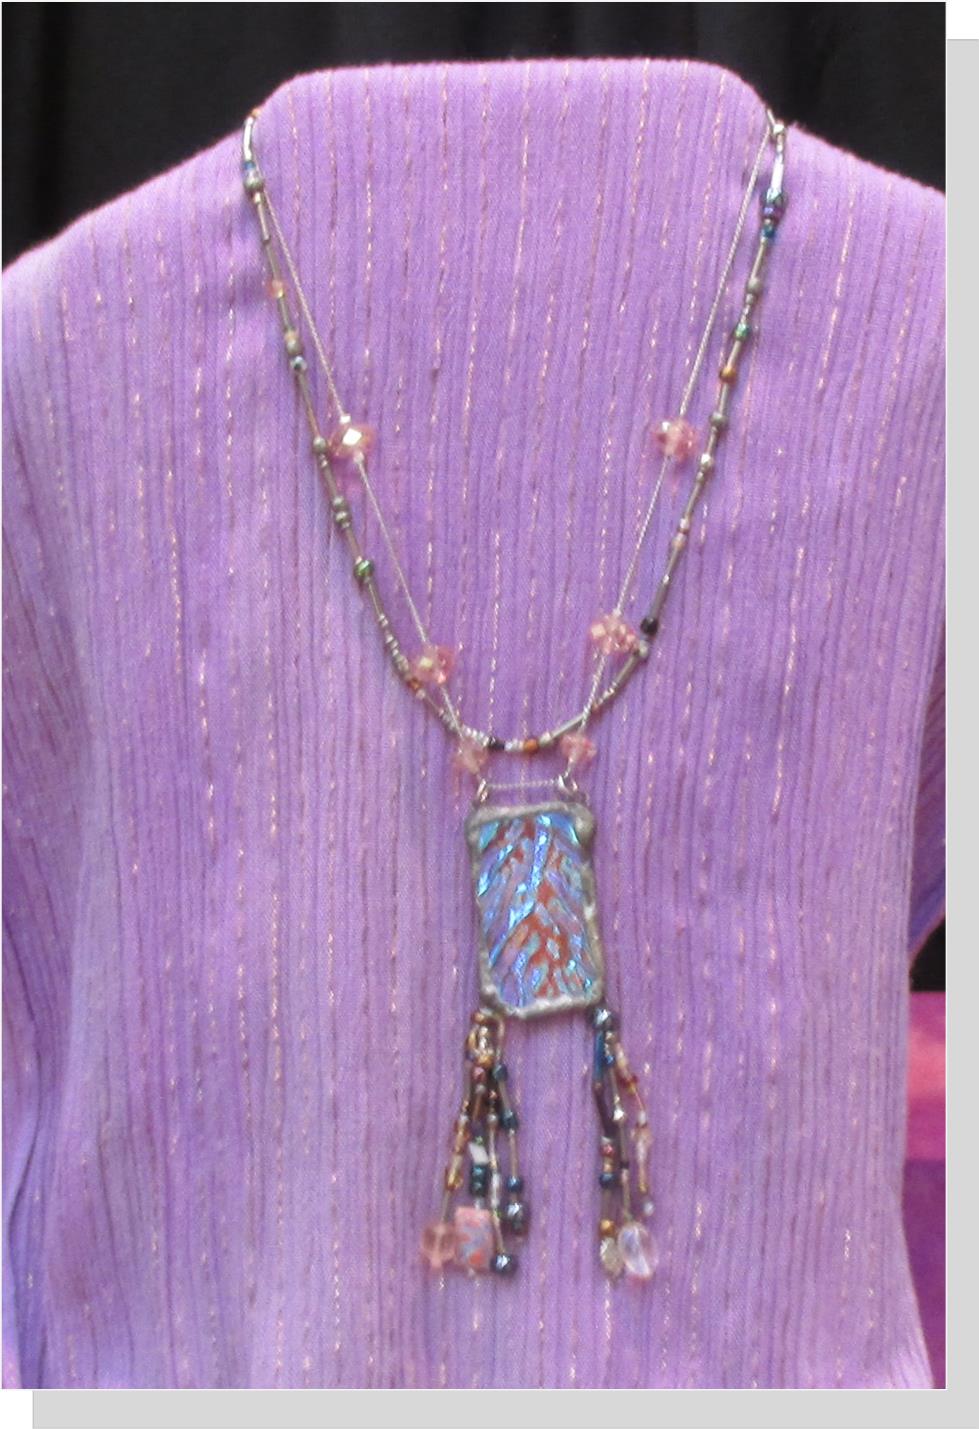 Glass and Bead Necklace, Artisans United Gallery, Hummer Rd, Annandale, VA